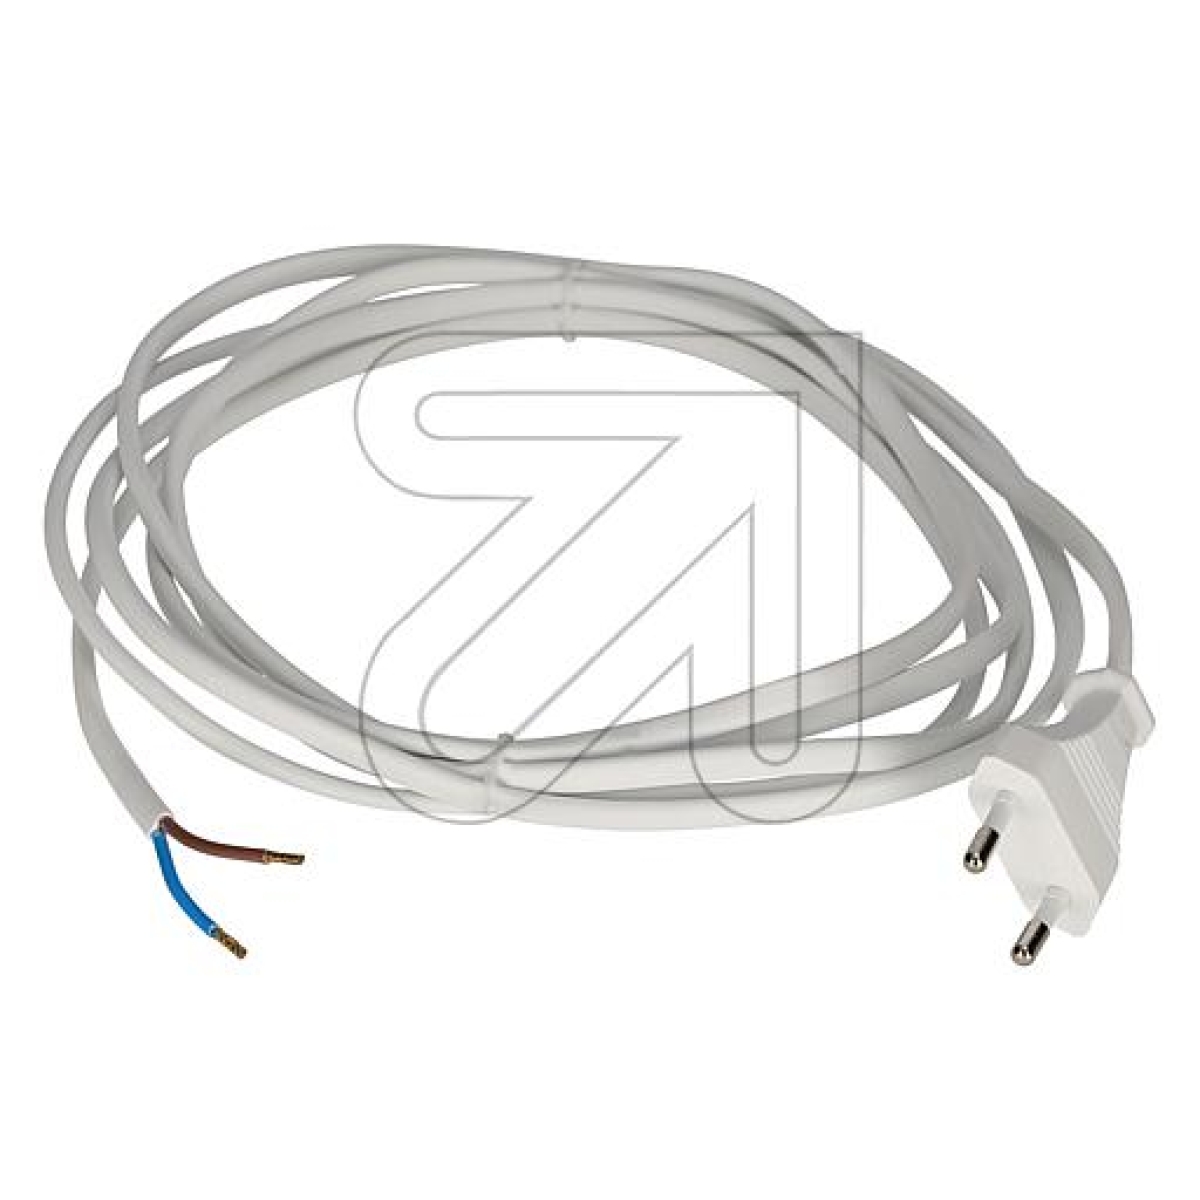 EGBEurope connection cable white 2.9m-Price for 5 pcs.Article-No: 021800